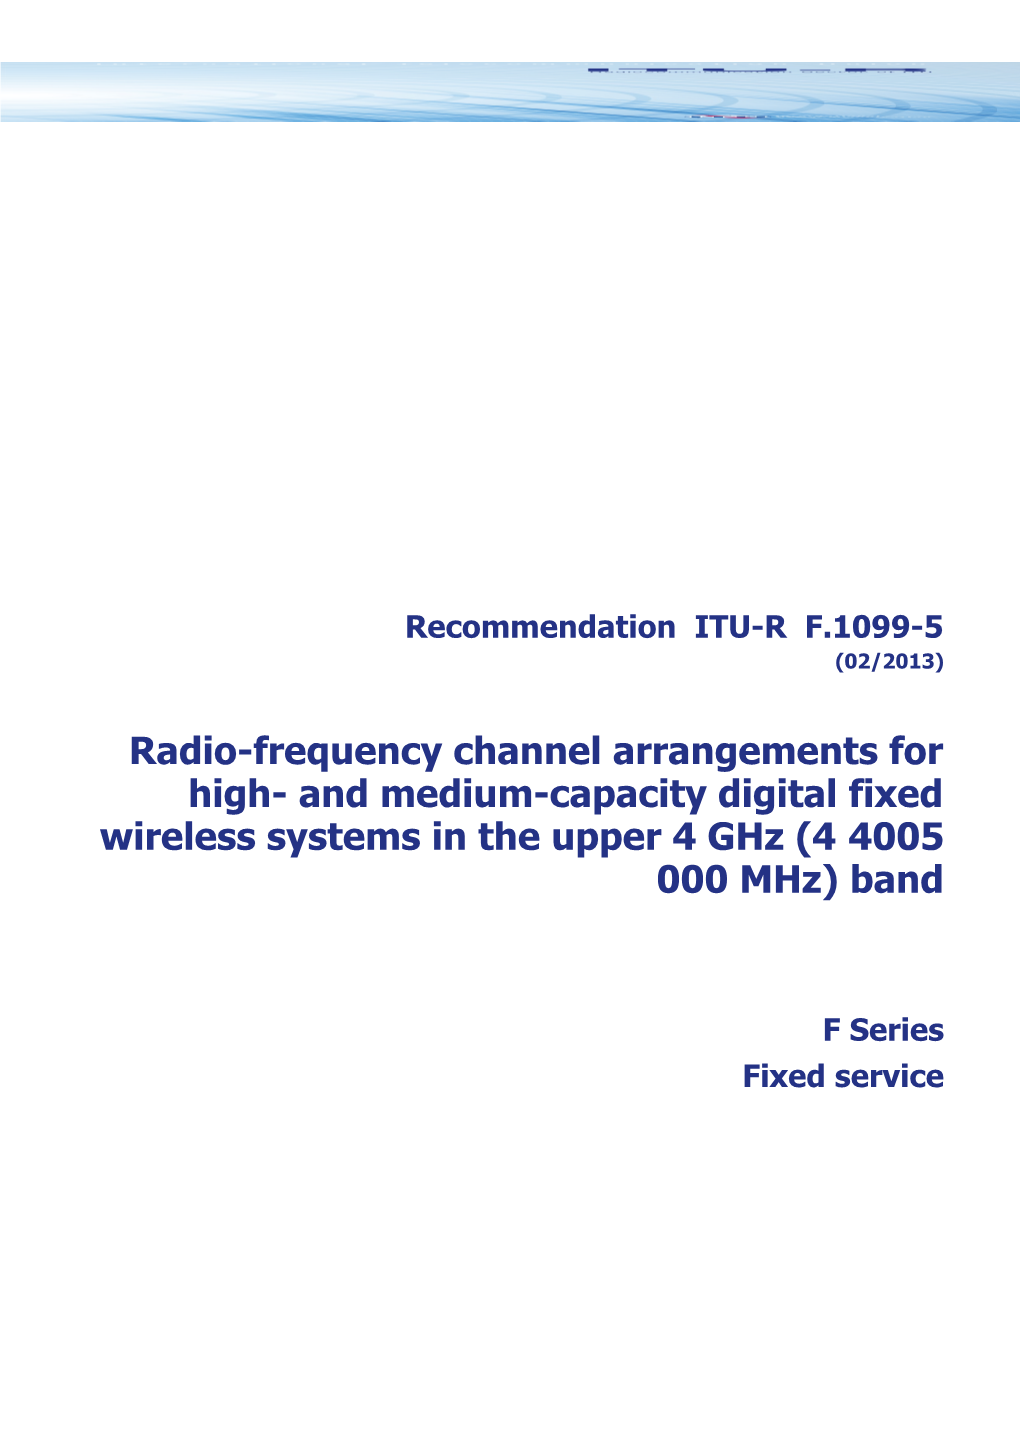 RECOMMENDATION ITU-R F.1099-5 - Radio-Frequency Channel Arrangements for High- And